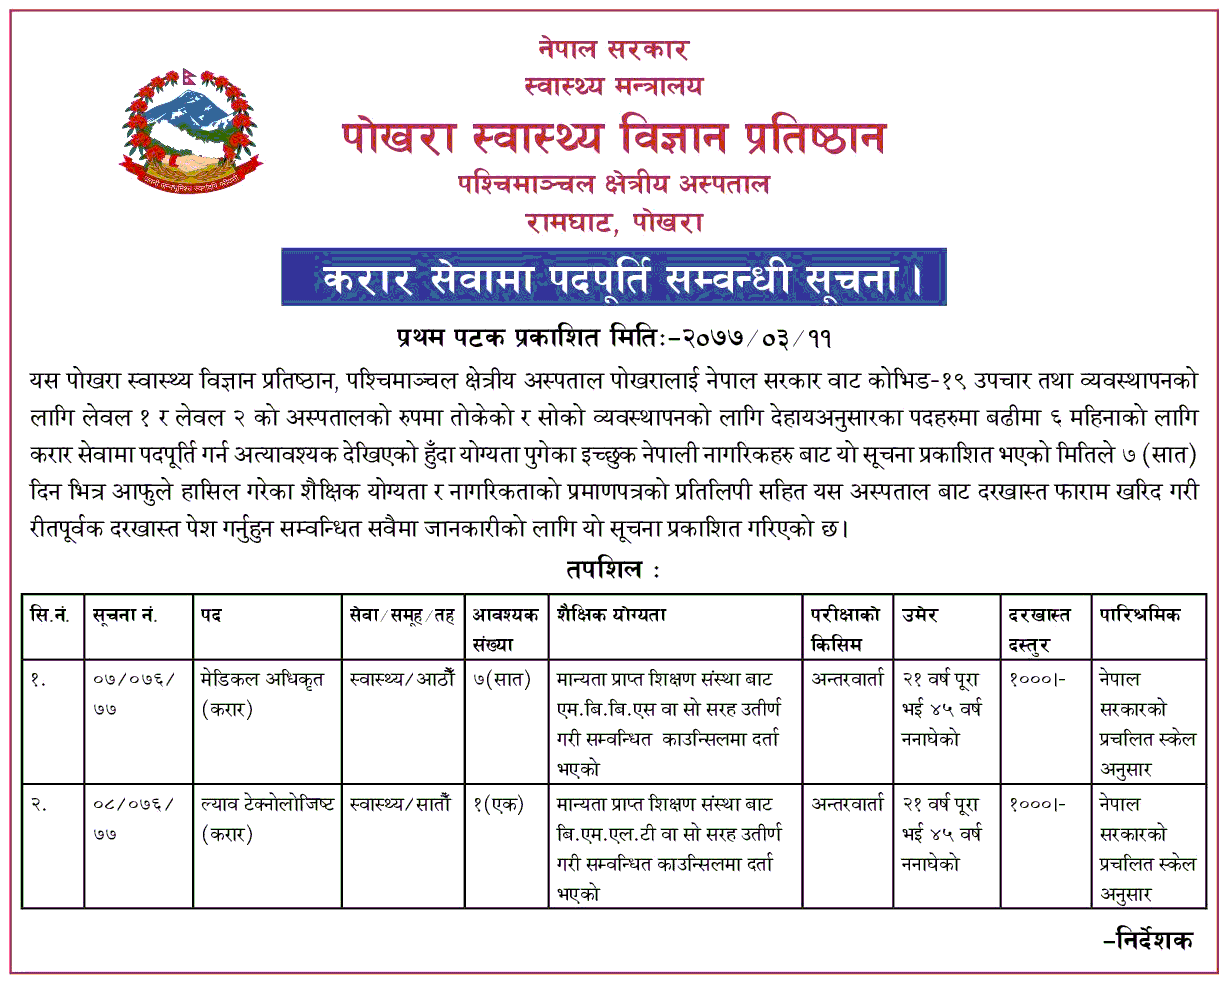 Pokhara Academy of Health Sciences Vacancy for Medical Officer and Lab Technologist